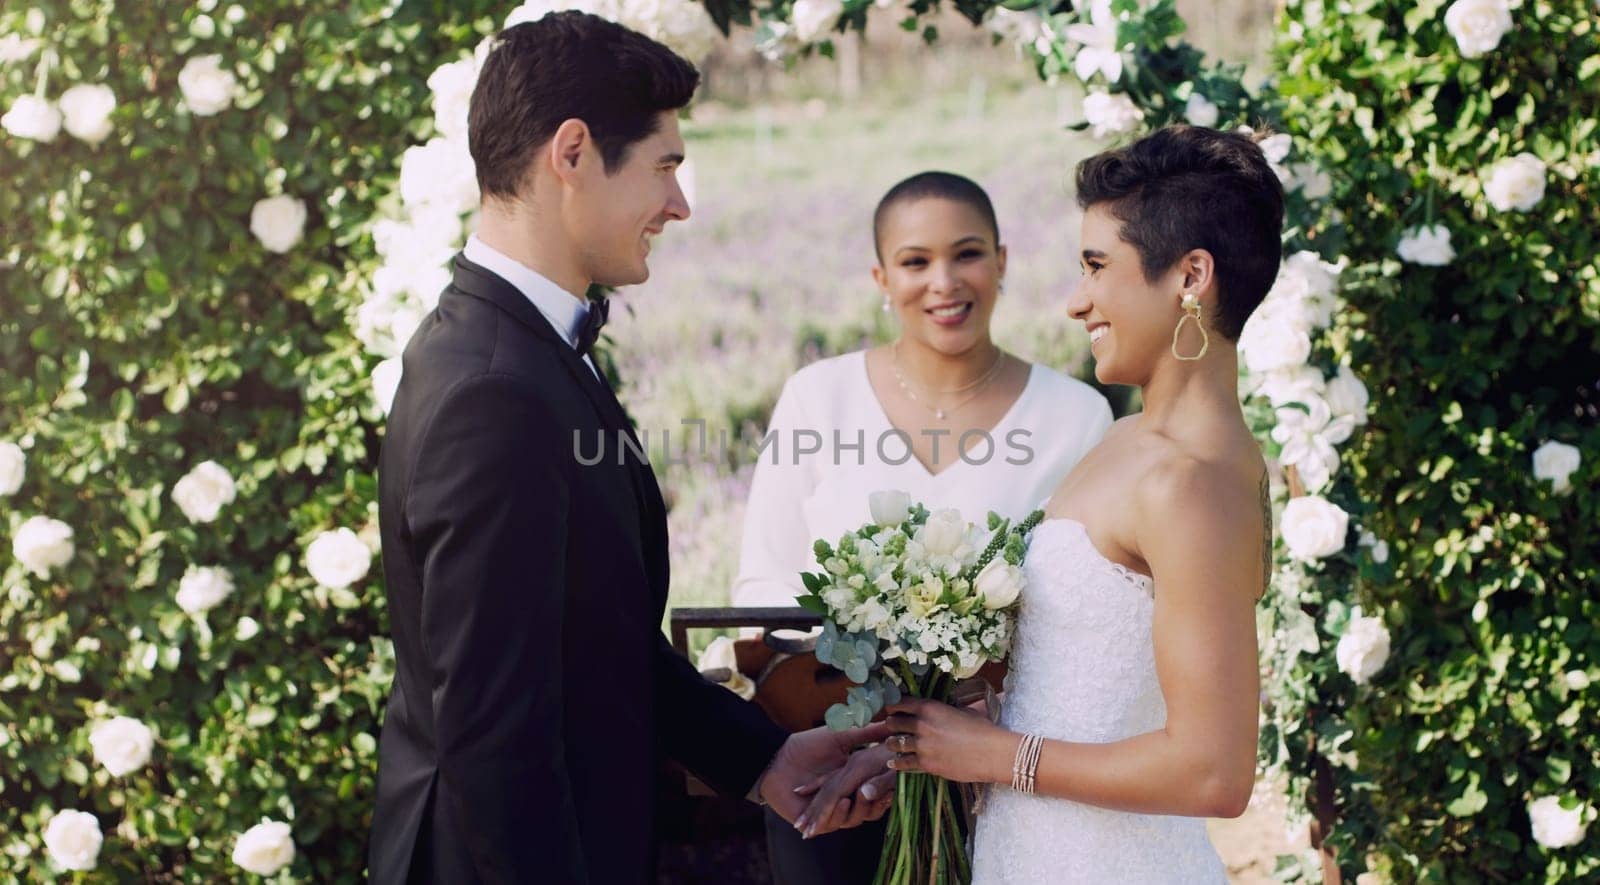 I want to be happy with you. an affectionate young couple smiling at each other while saying their vows on their wedding day